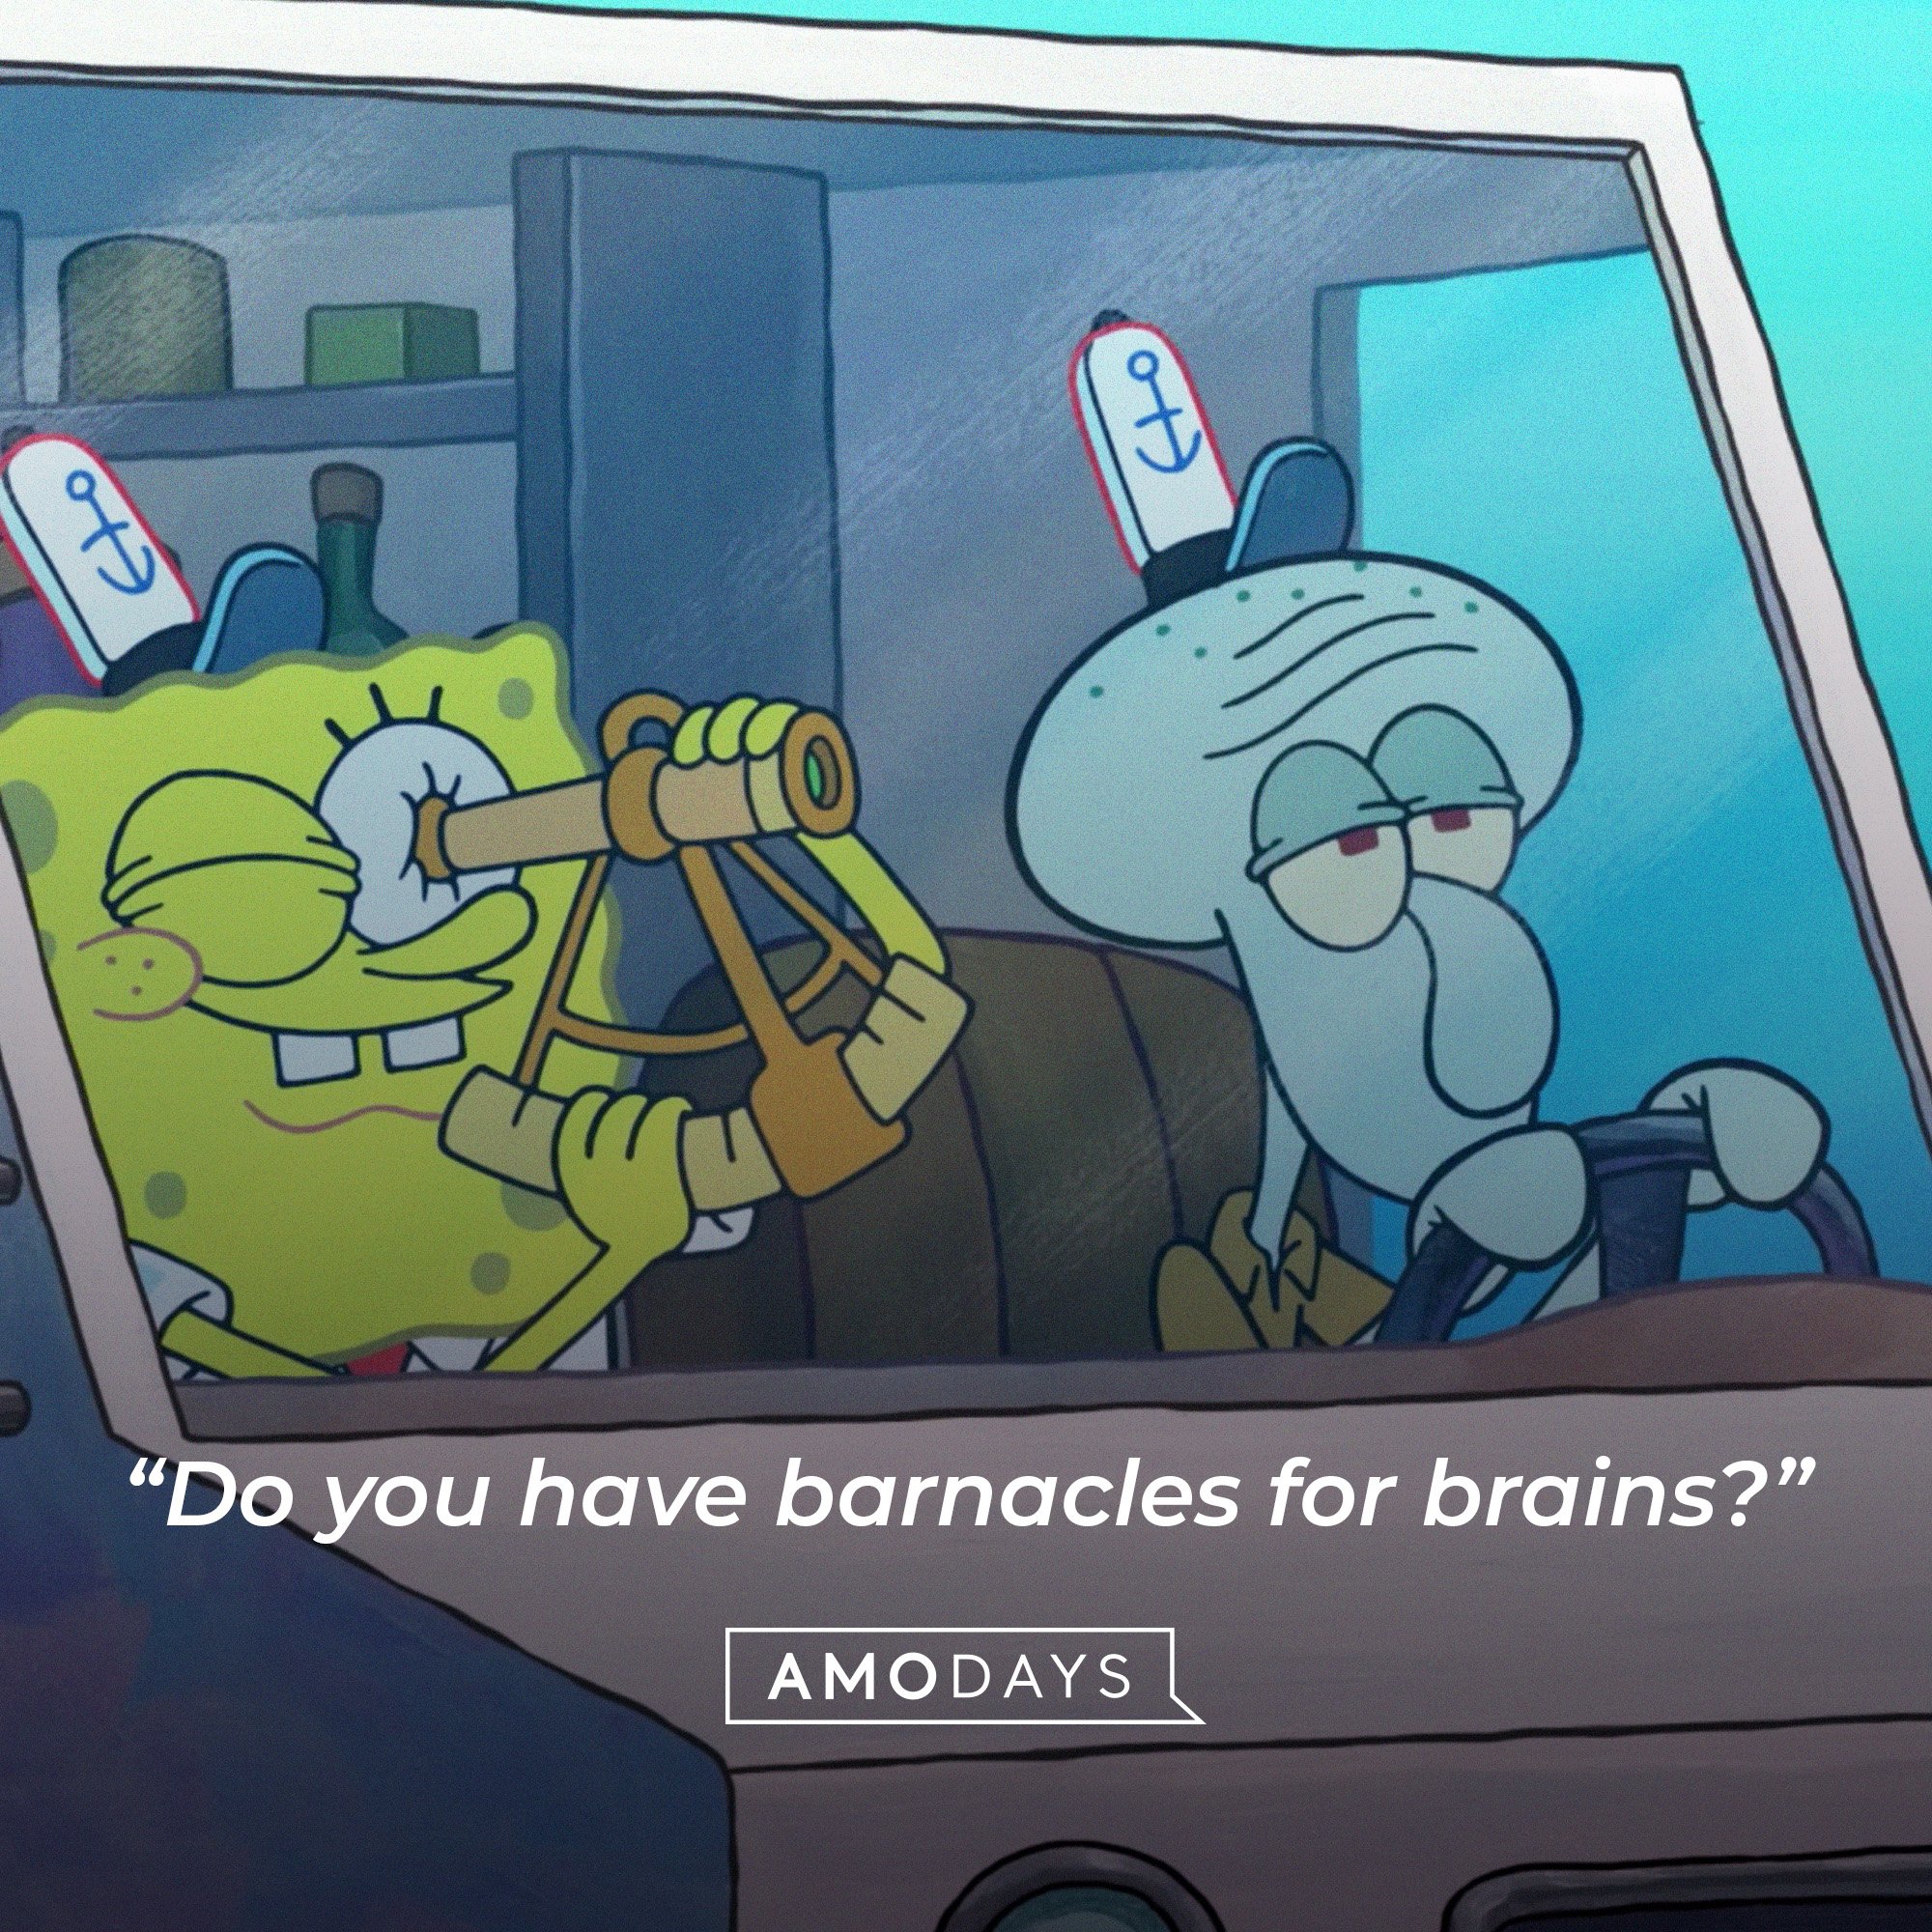 Squidward Tentacles’ quote: “Do you have barnacles for brains?”  | Source: AmoDays